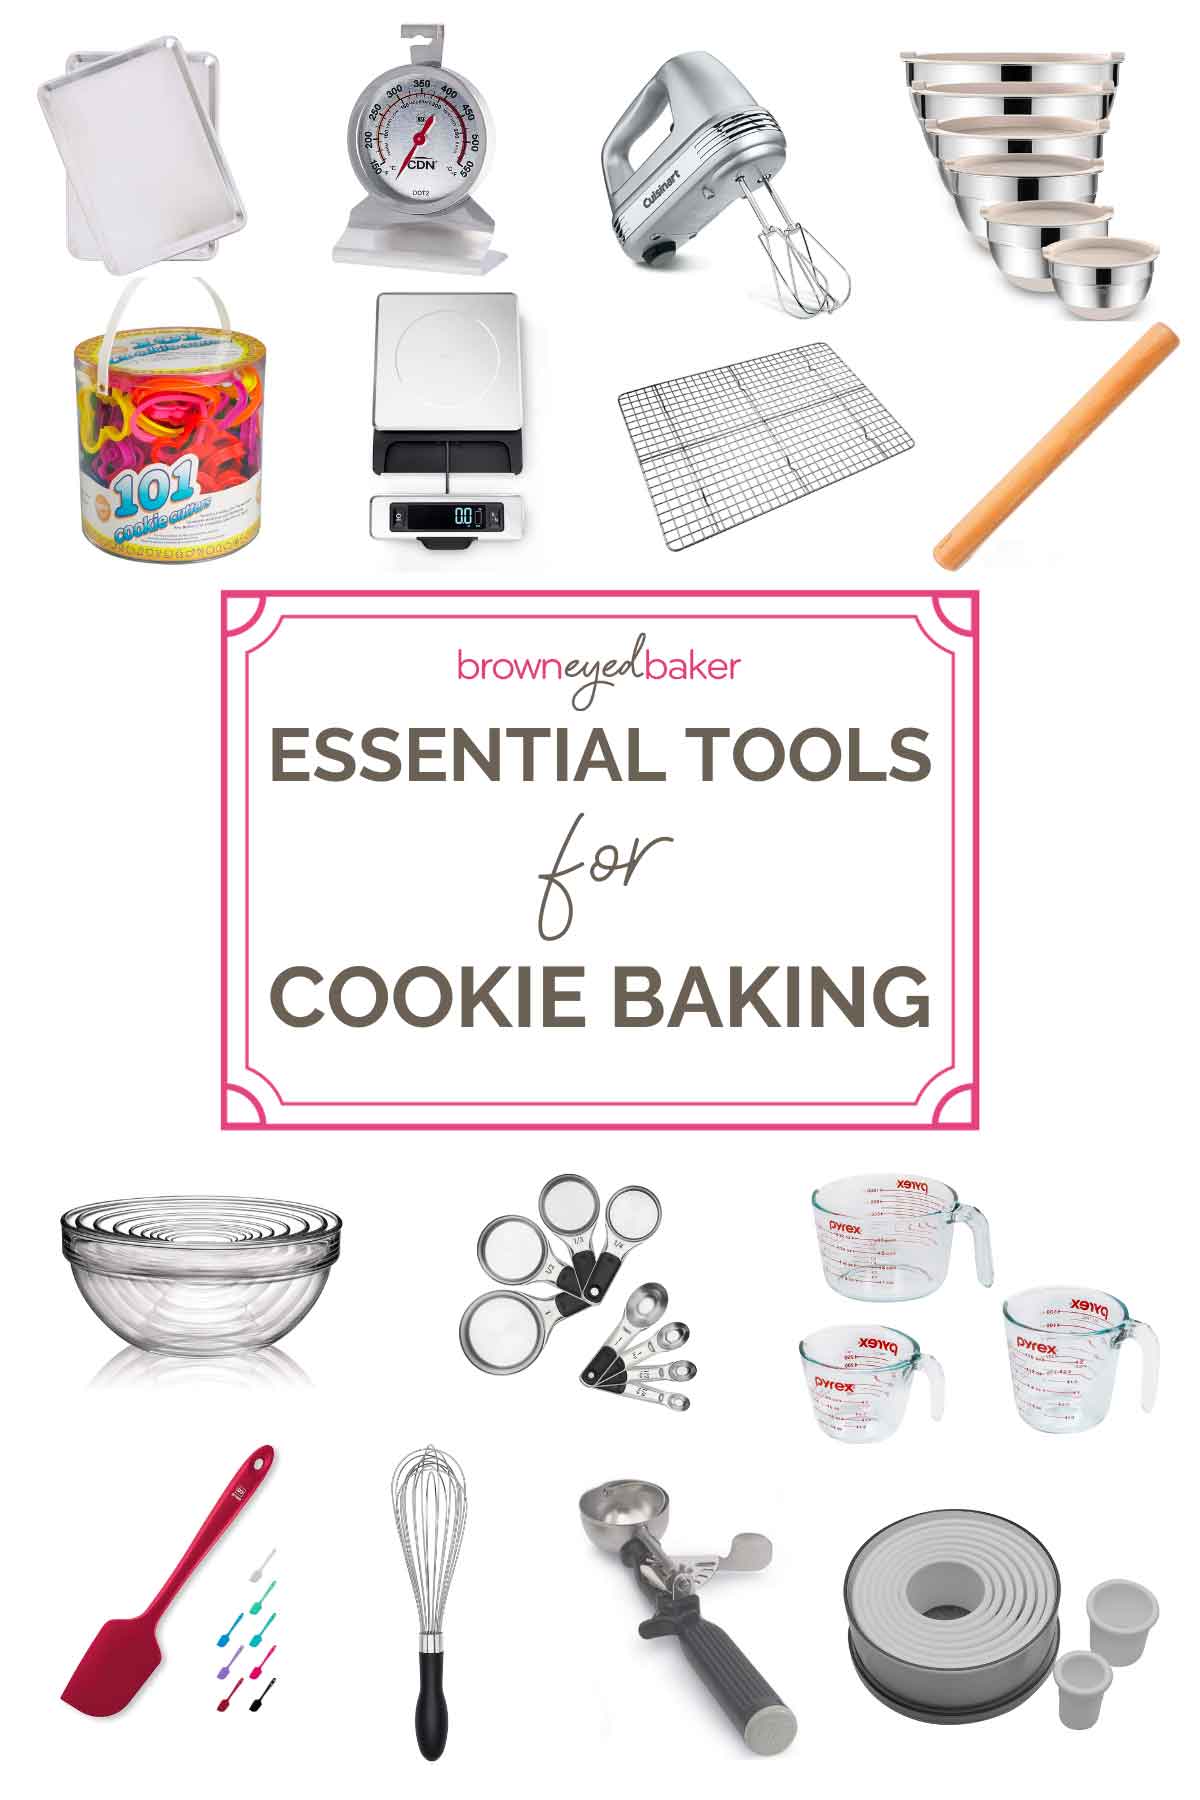 Collage of product photos with a pink frame in the center around the text "Essential Tools for Cooking Baking".